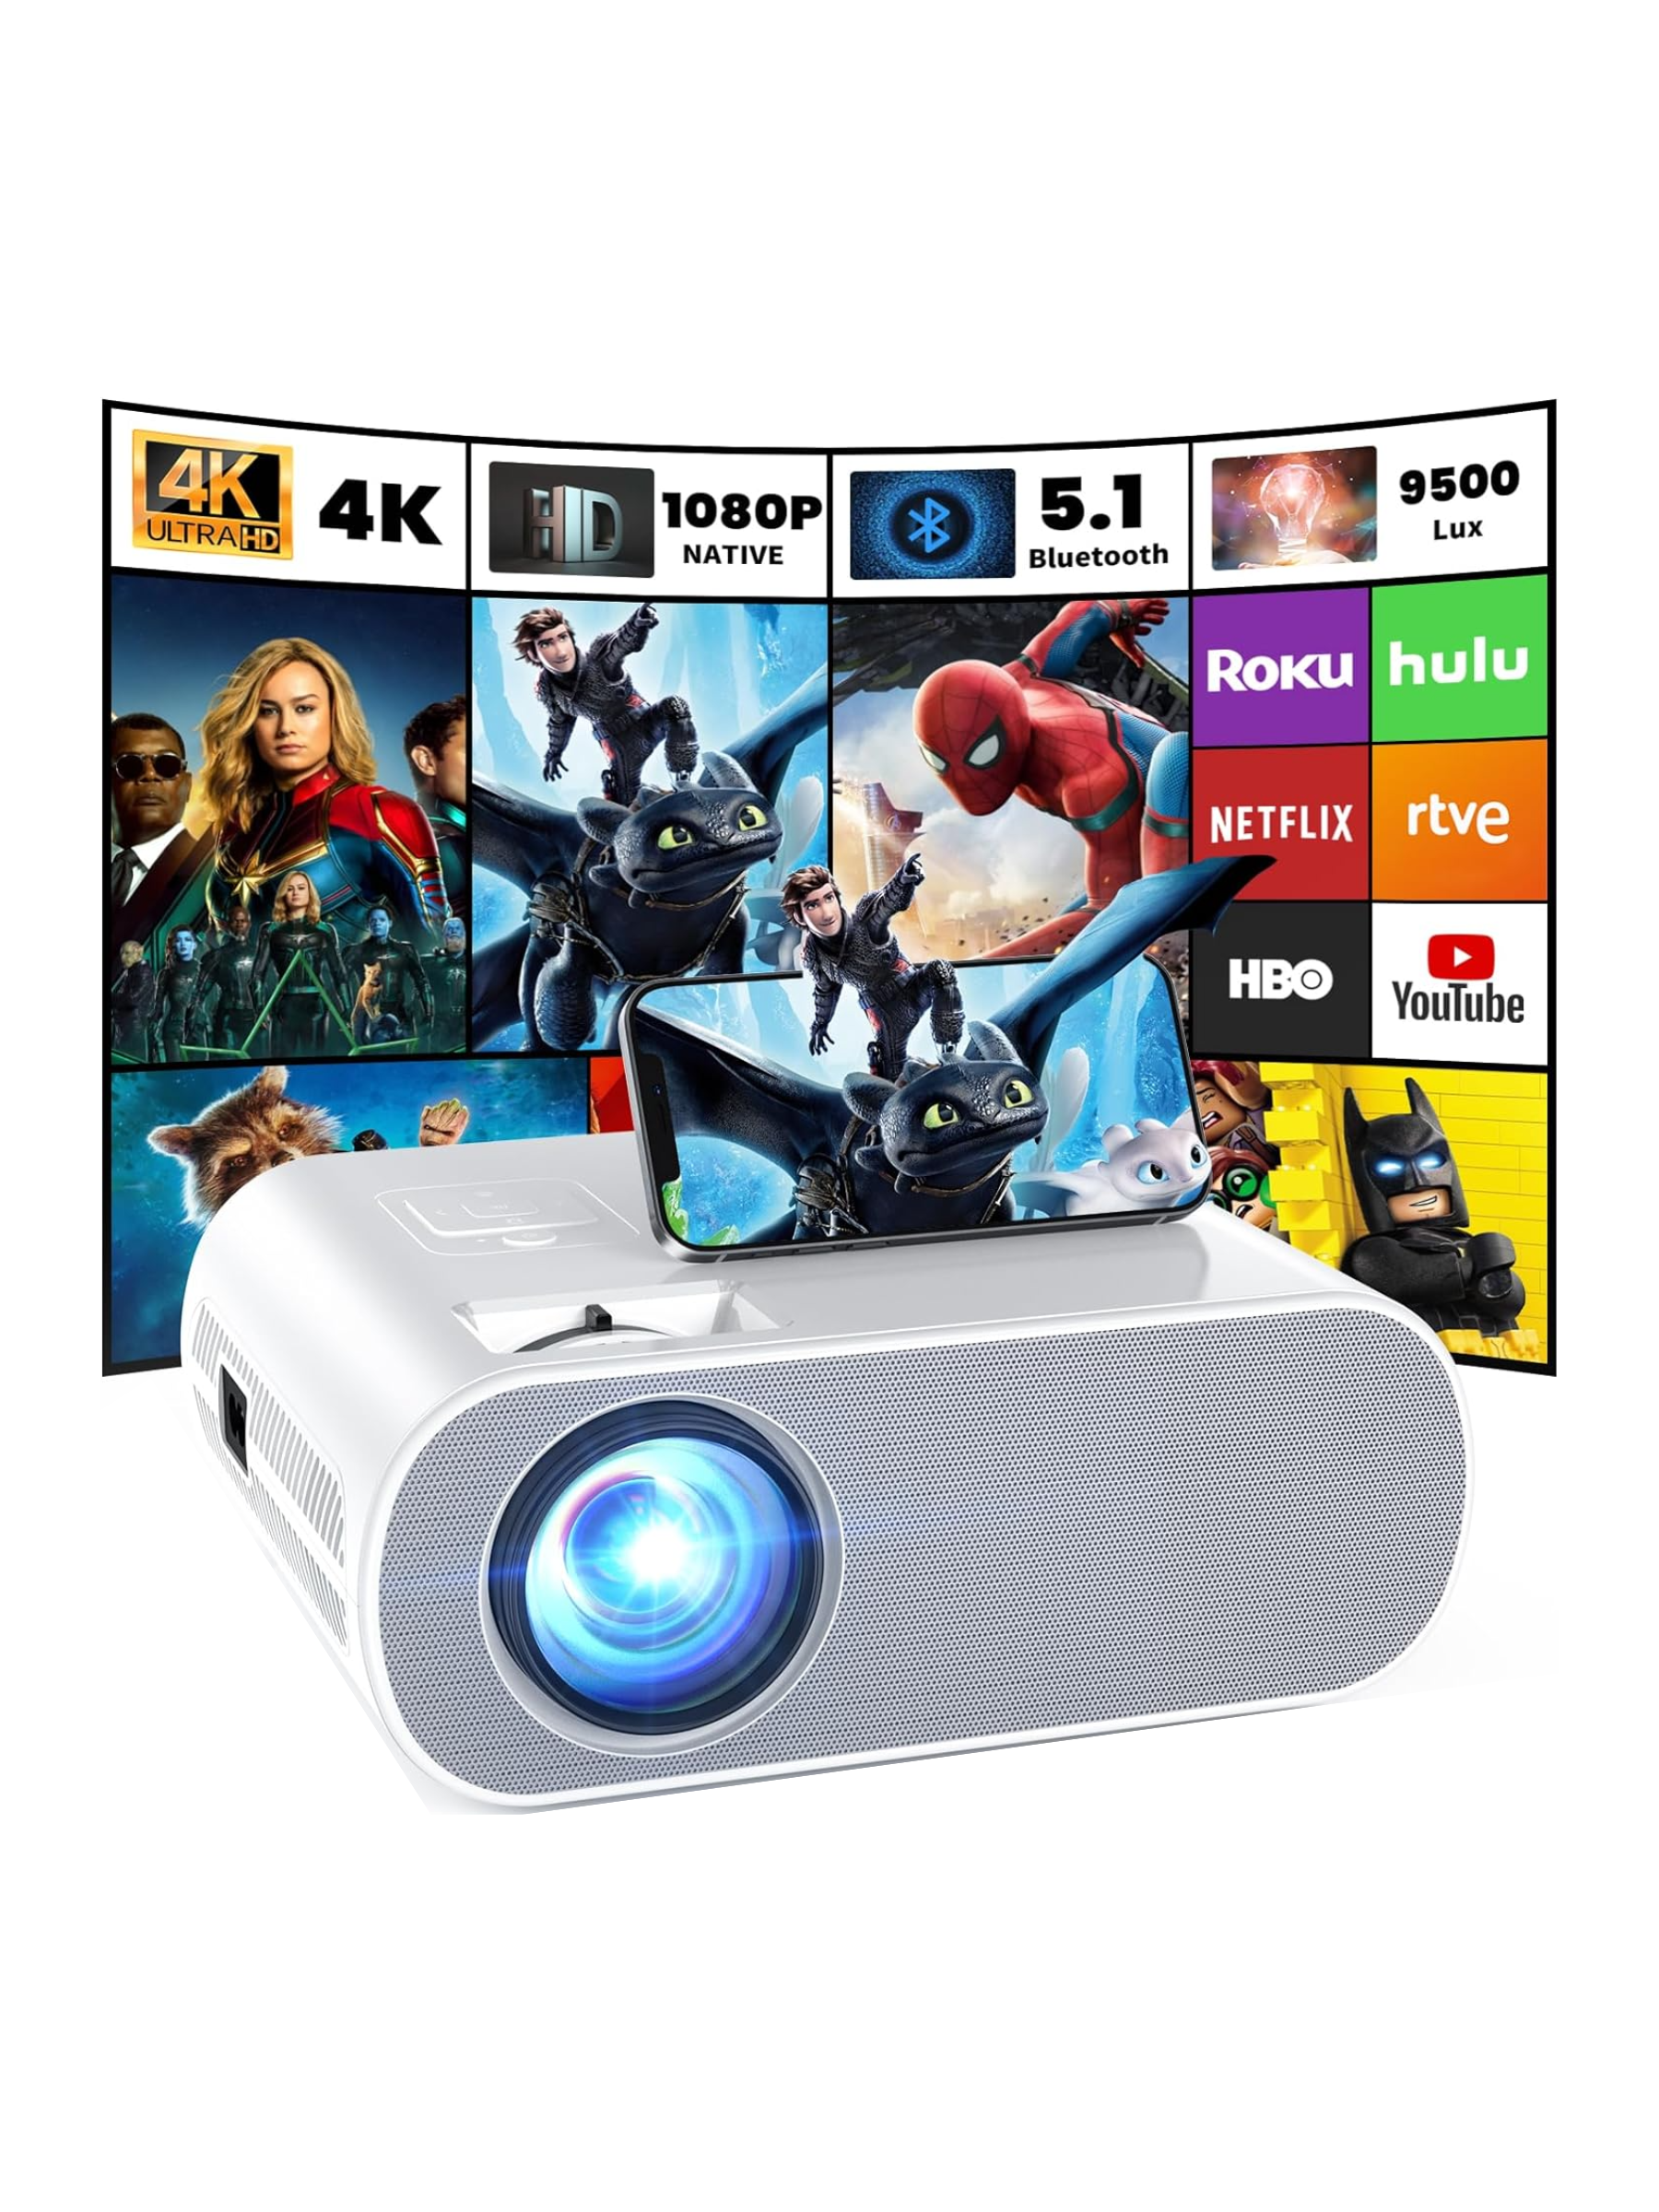 Gift your 18-year-old a portable projector that connects via Bluetooth and Wi-Fi. Then insist that they use it for family movie nights with you. $110, Amazon. <a href="https://www.amazon.com/dp/B07QMRRHPY?">Get it now!</a><p>Sign up for today’s biggest stories, from pop culture to politics.</p><a href="https://www.glamour.com/newsletter/news?sourceCode=msnsend">Sign Up</a>